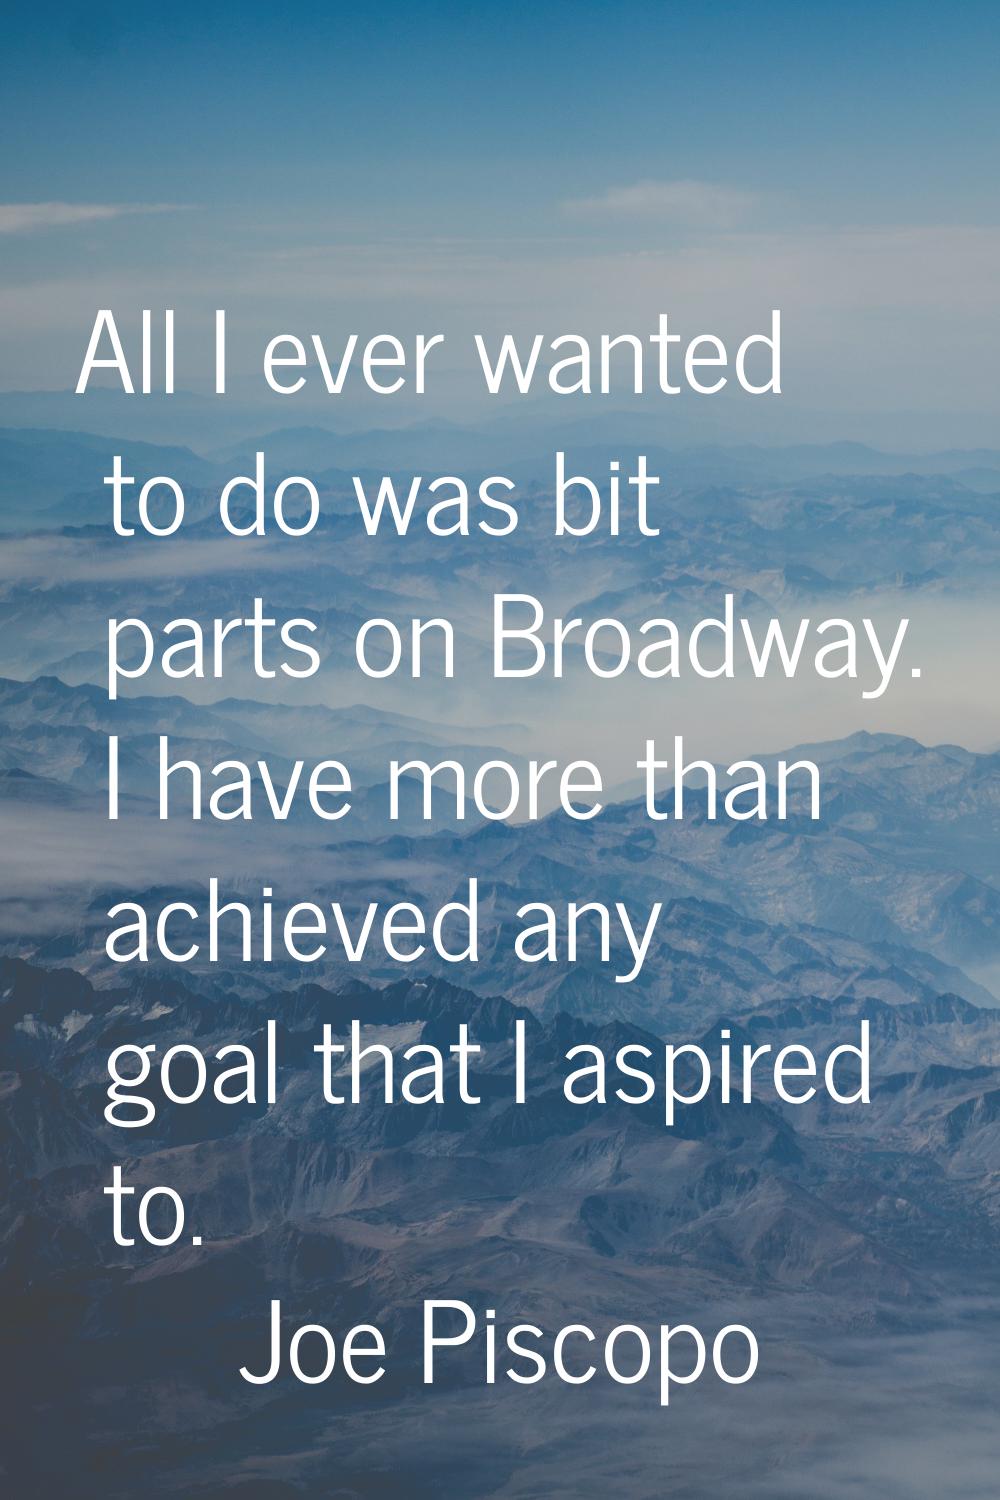 All I ever wanted to do was bit parts on Broadway. I have more than achieved any goal that I aspire